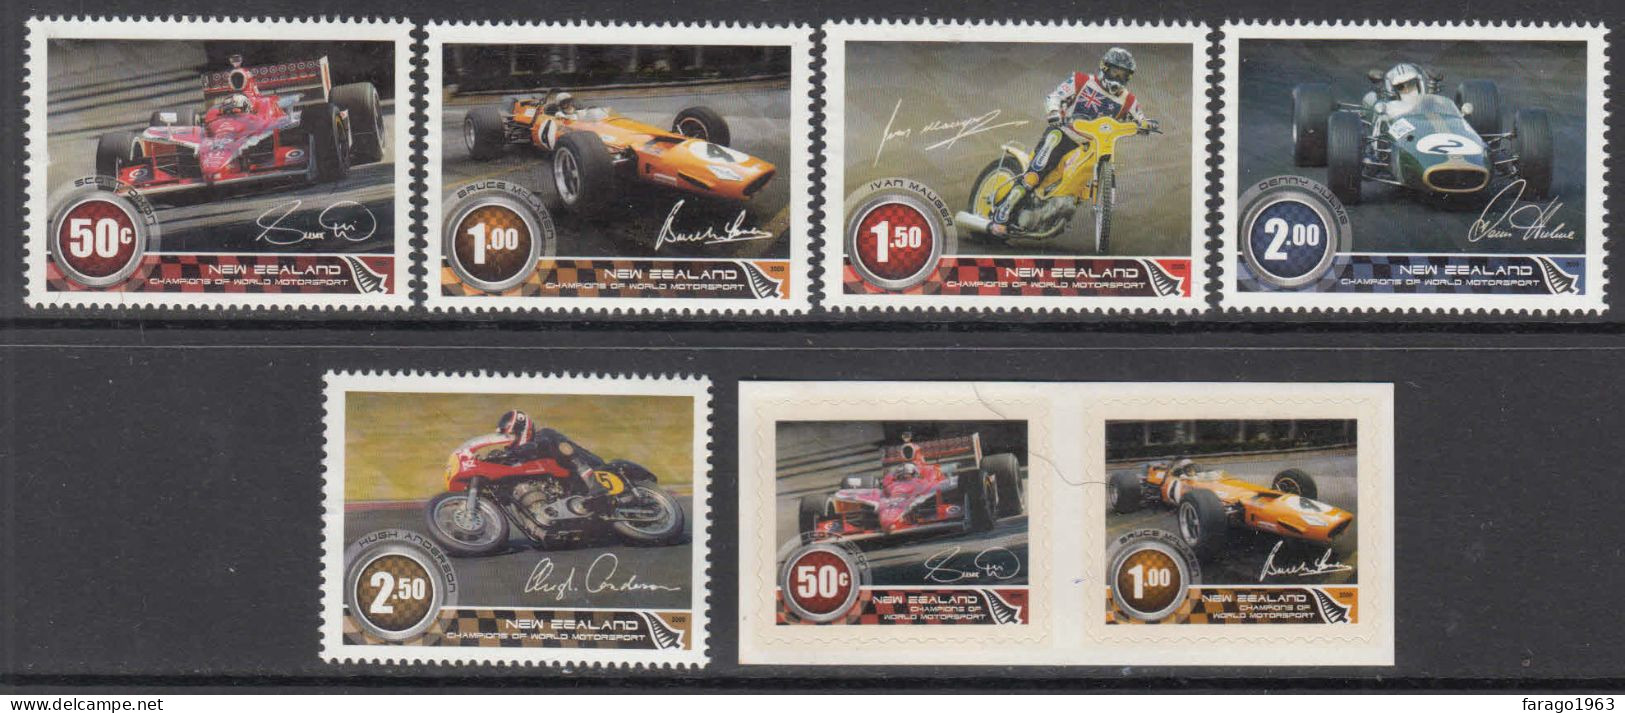 2009 New Zealand Motor Champions Car Racing Motorcycles Complete Set Of 7 MNH @ BELOW FACE VALUE - Neufs